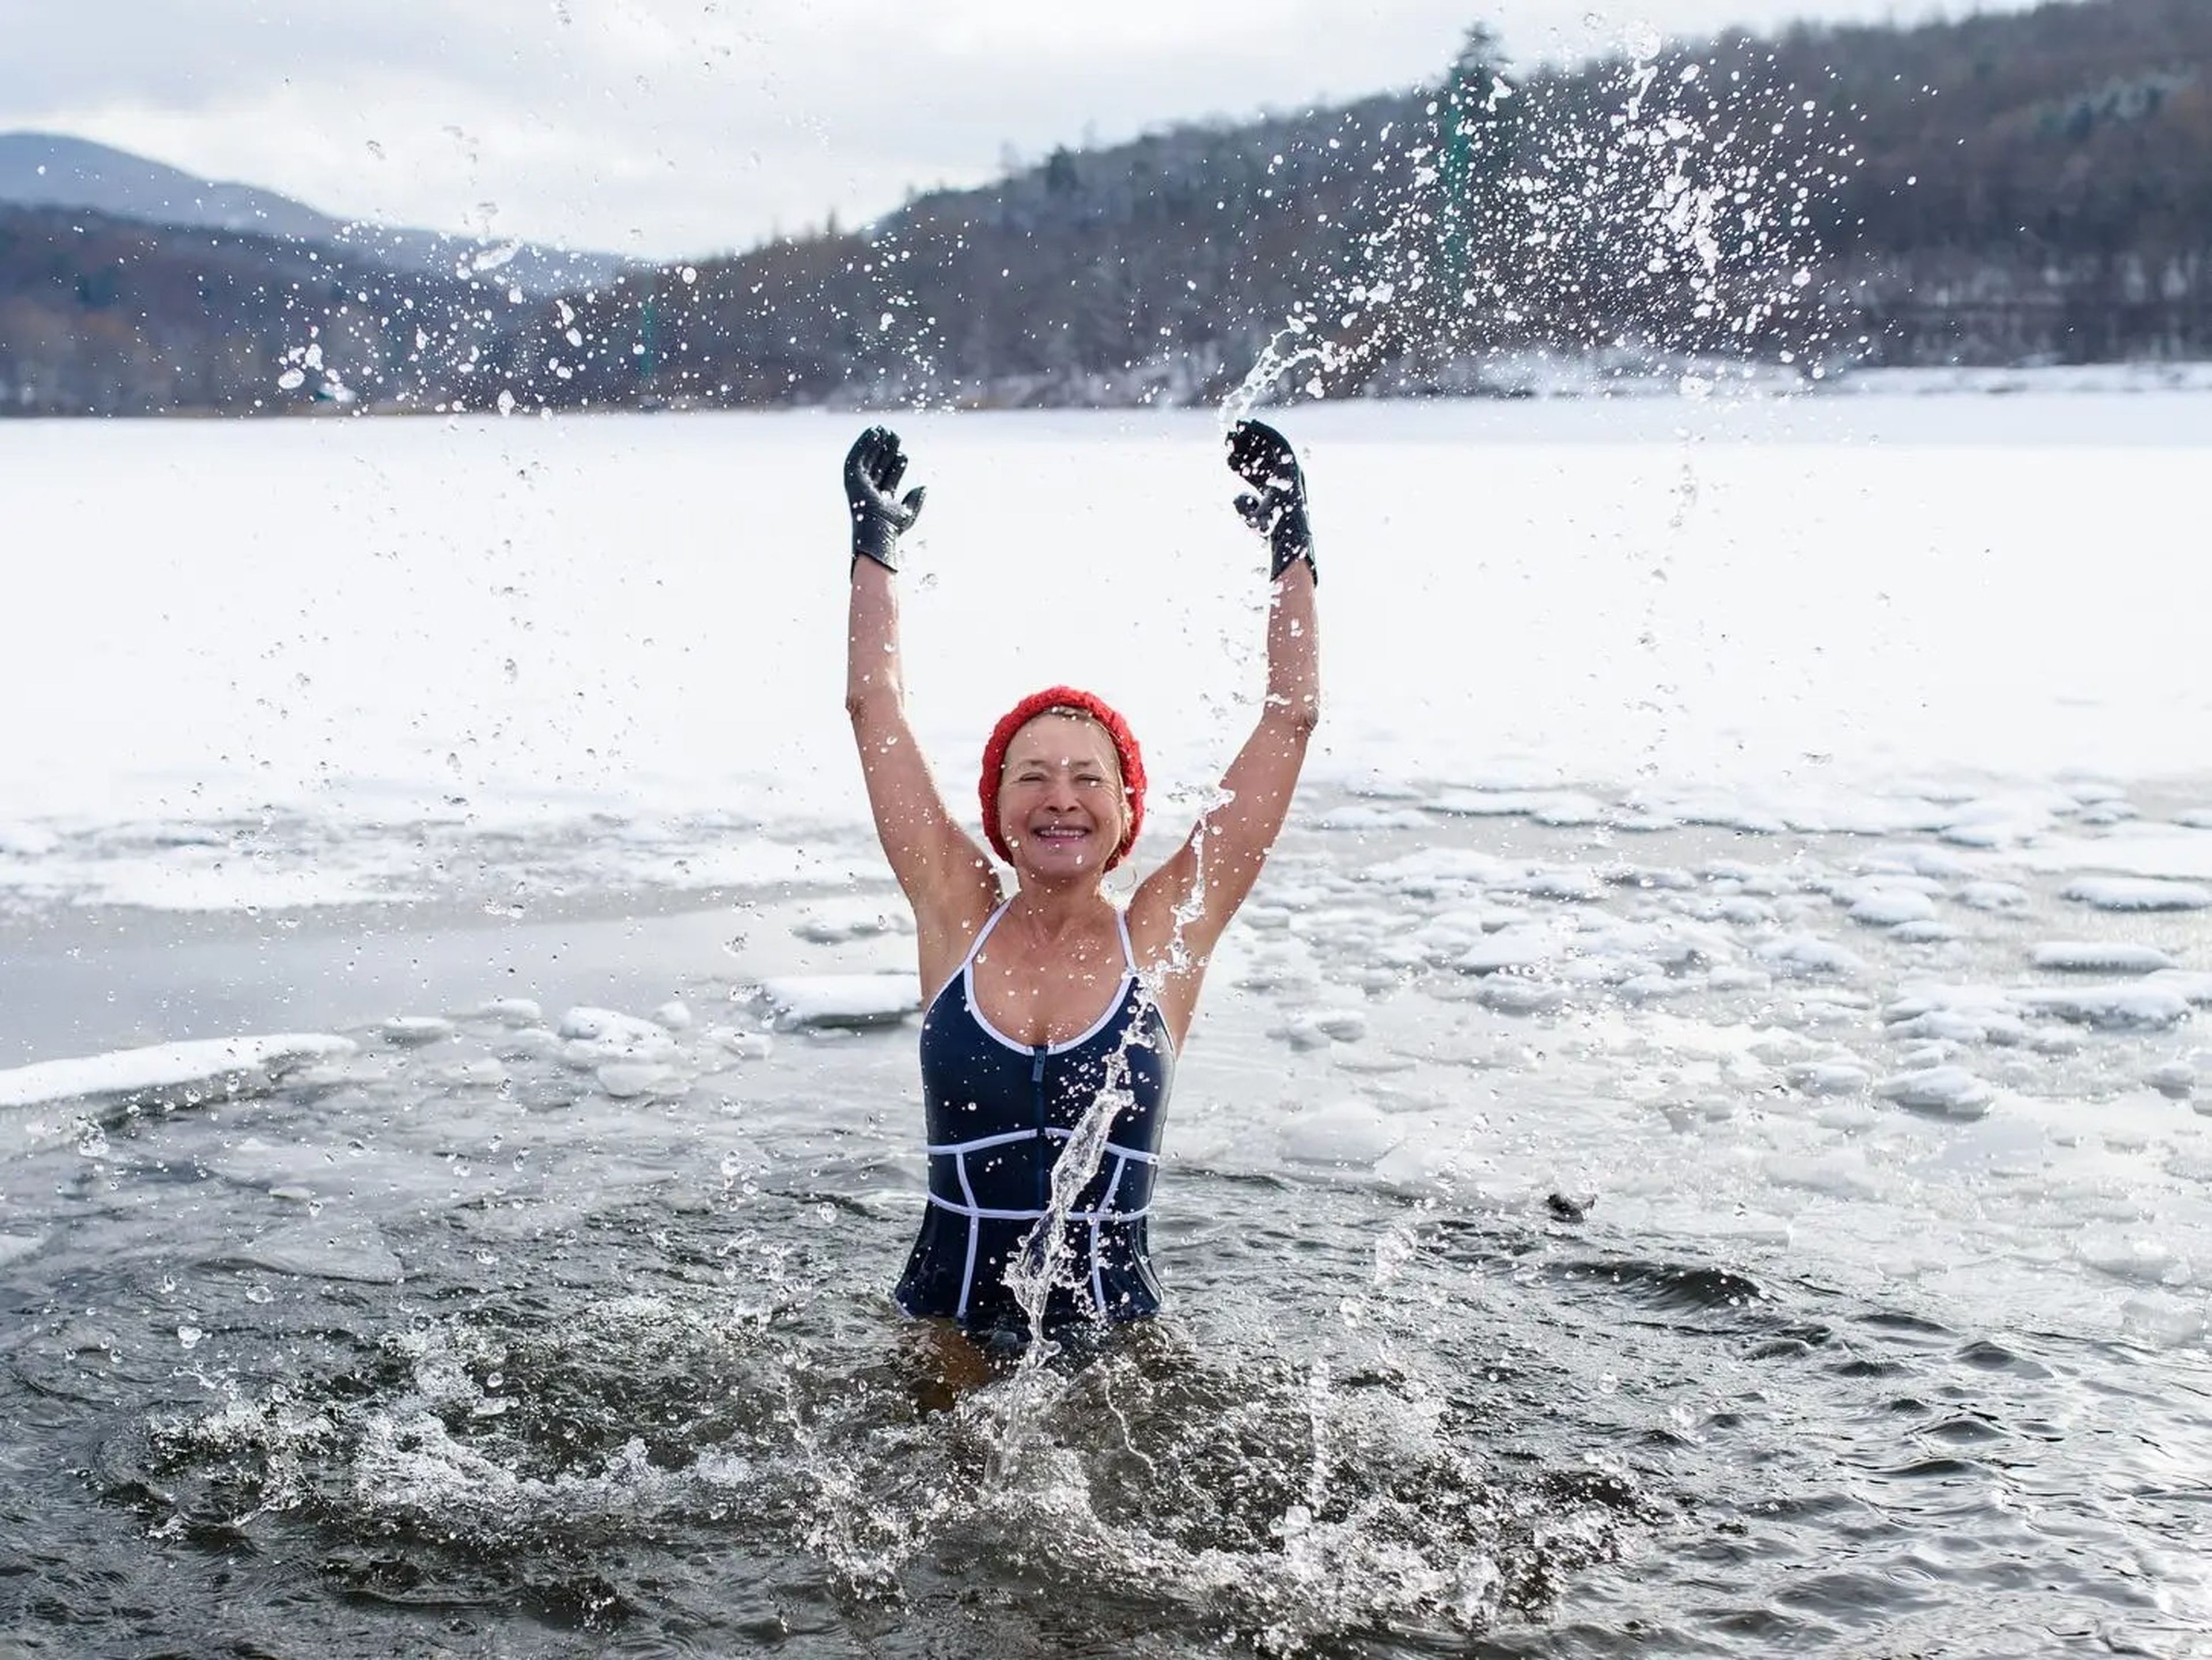 A woman in swimsuit stands in a lake in winter splashing around with a smile on her face.